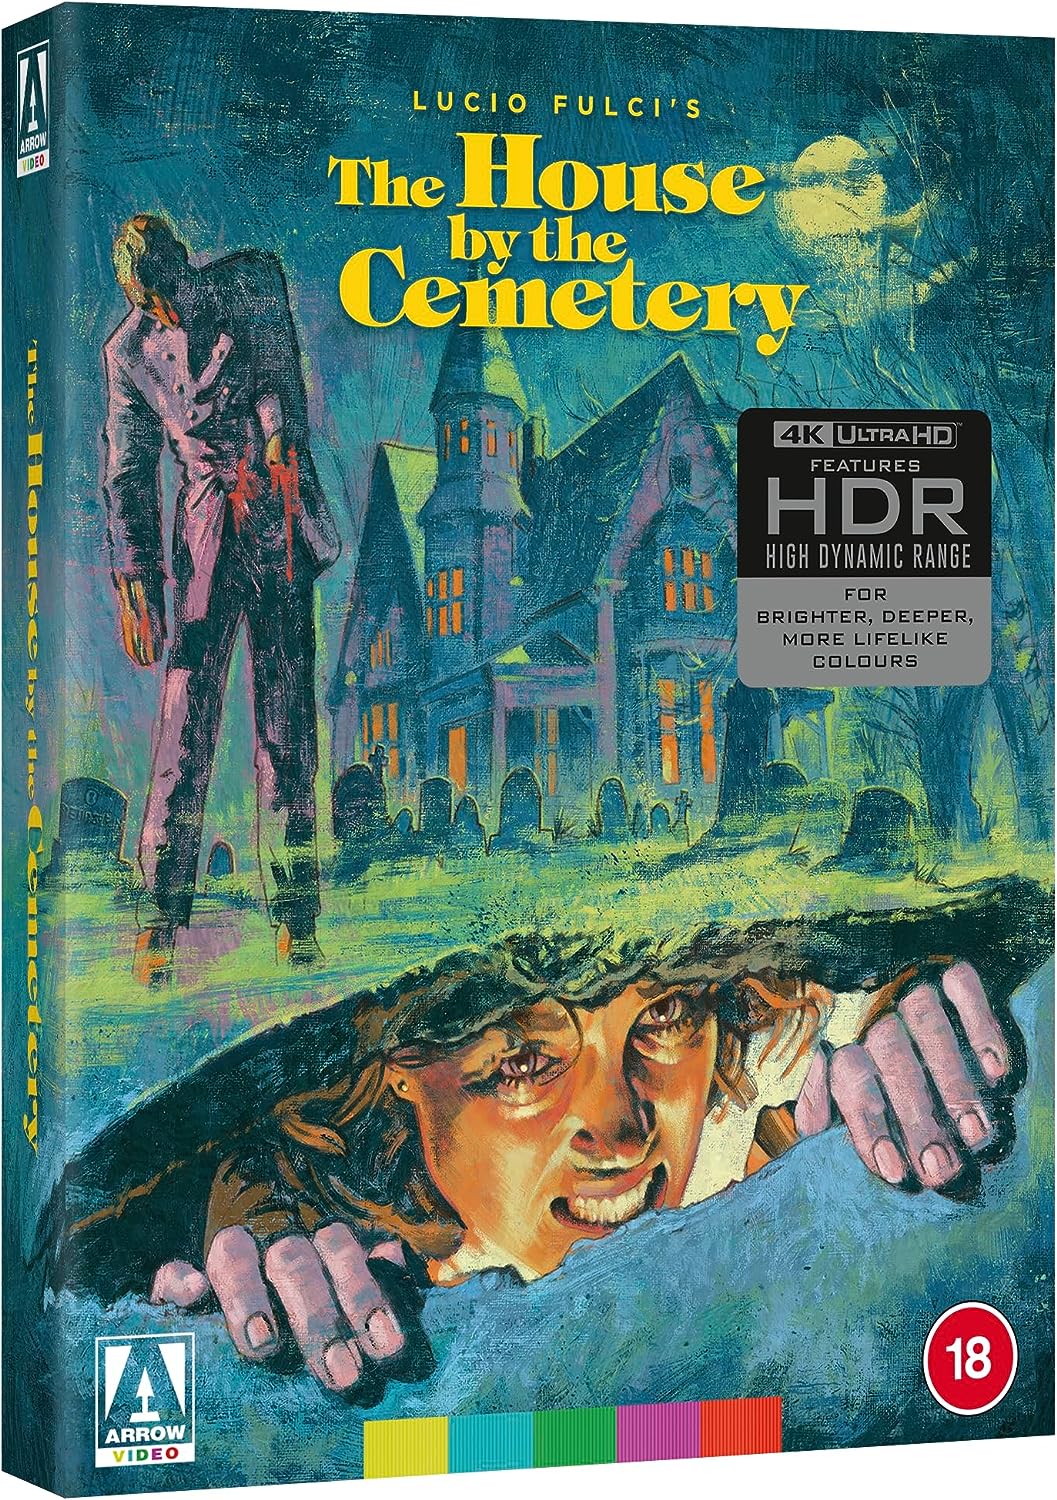 The House by the Cemetery Limited Edition Arrow Video 4K UHD [NEW] [SLIPCOVER]